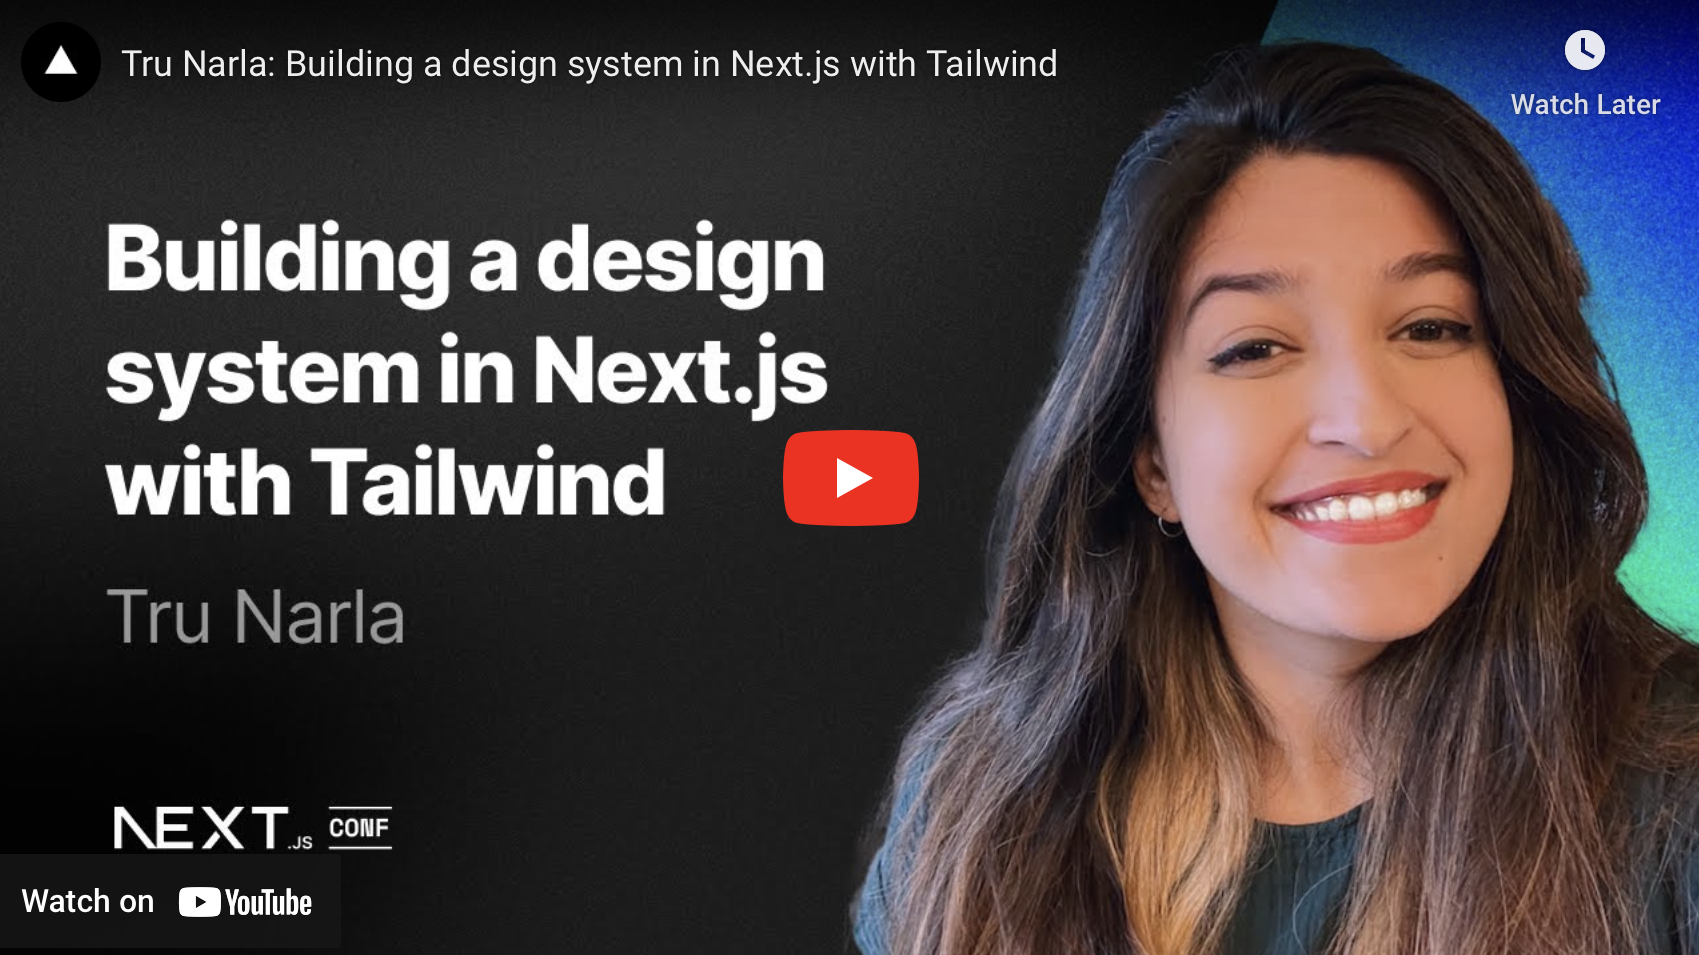 Building a design system in Next.js with Tailwind